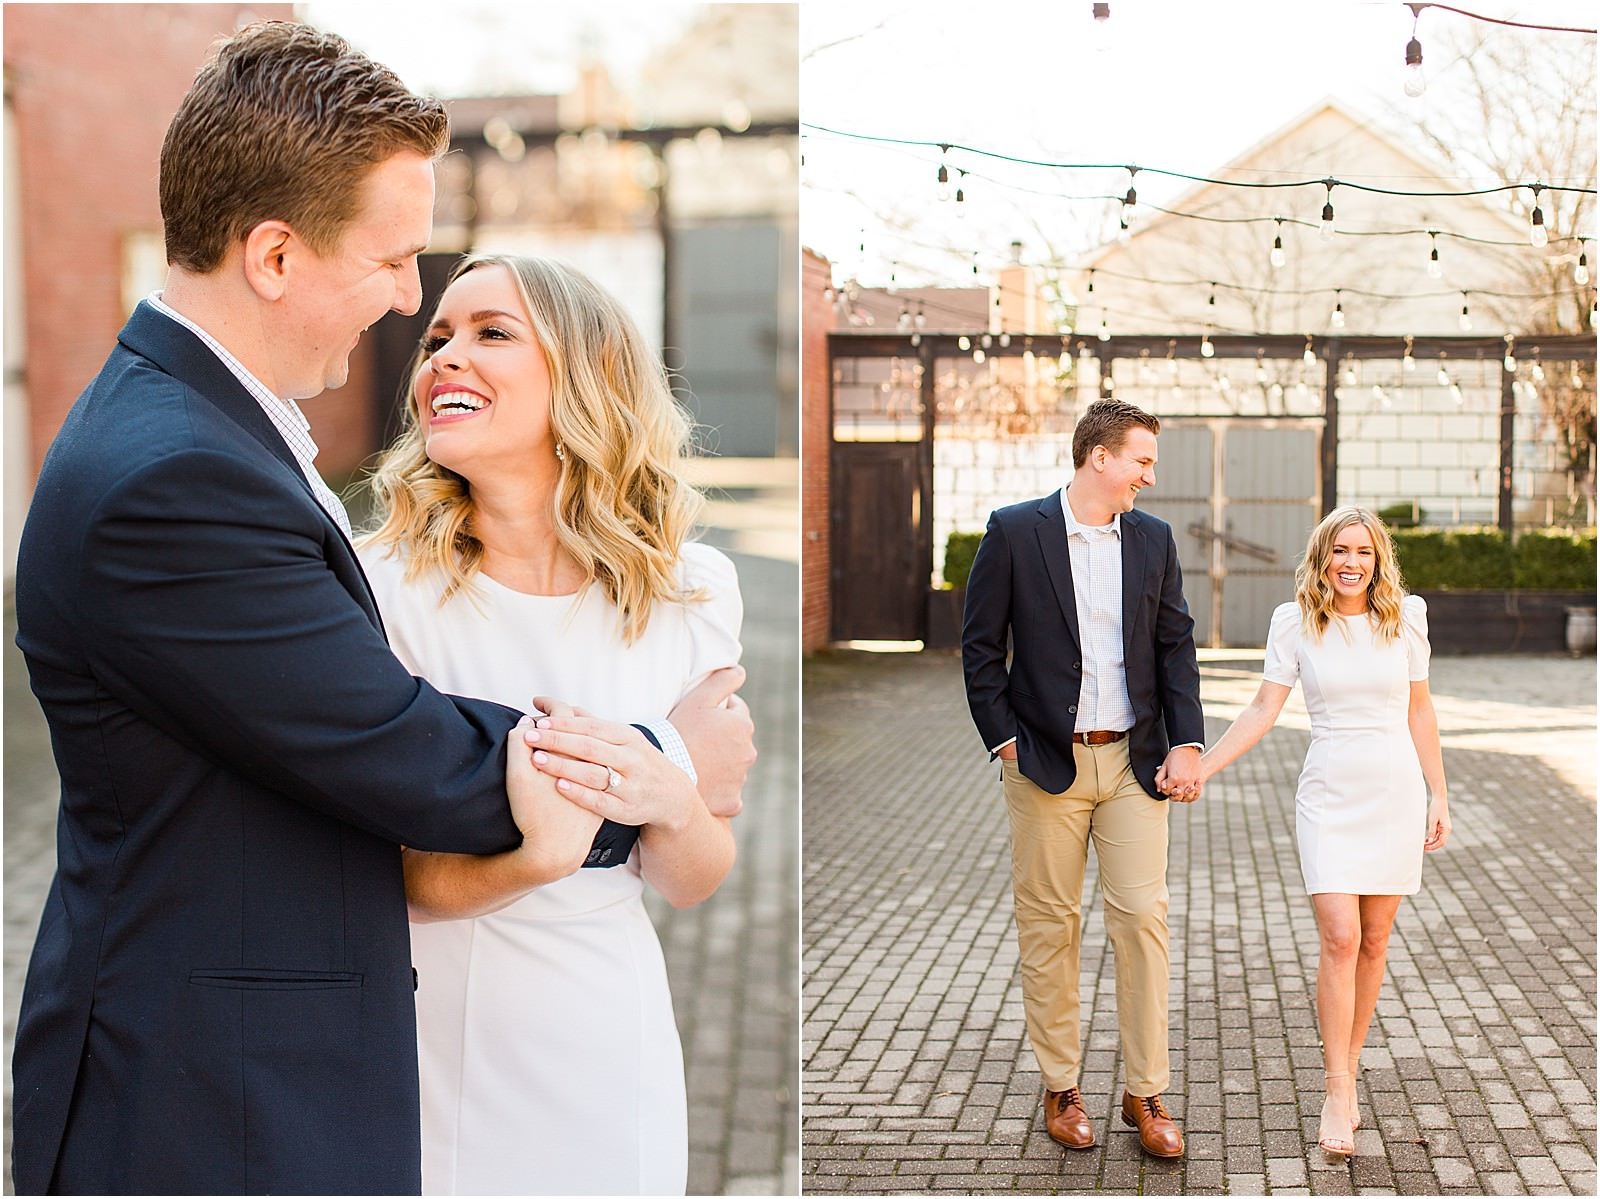 Madison and Christaan | A 20 West Engagement Session in Downto wn Newburgh | Bret and Brandie Photography007.jpg